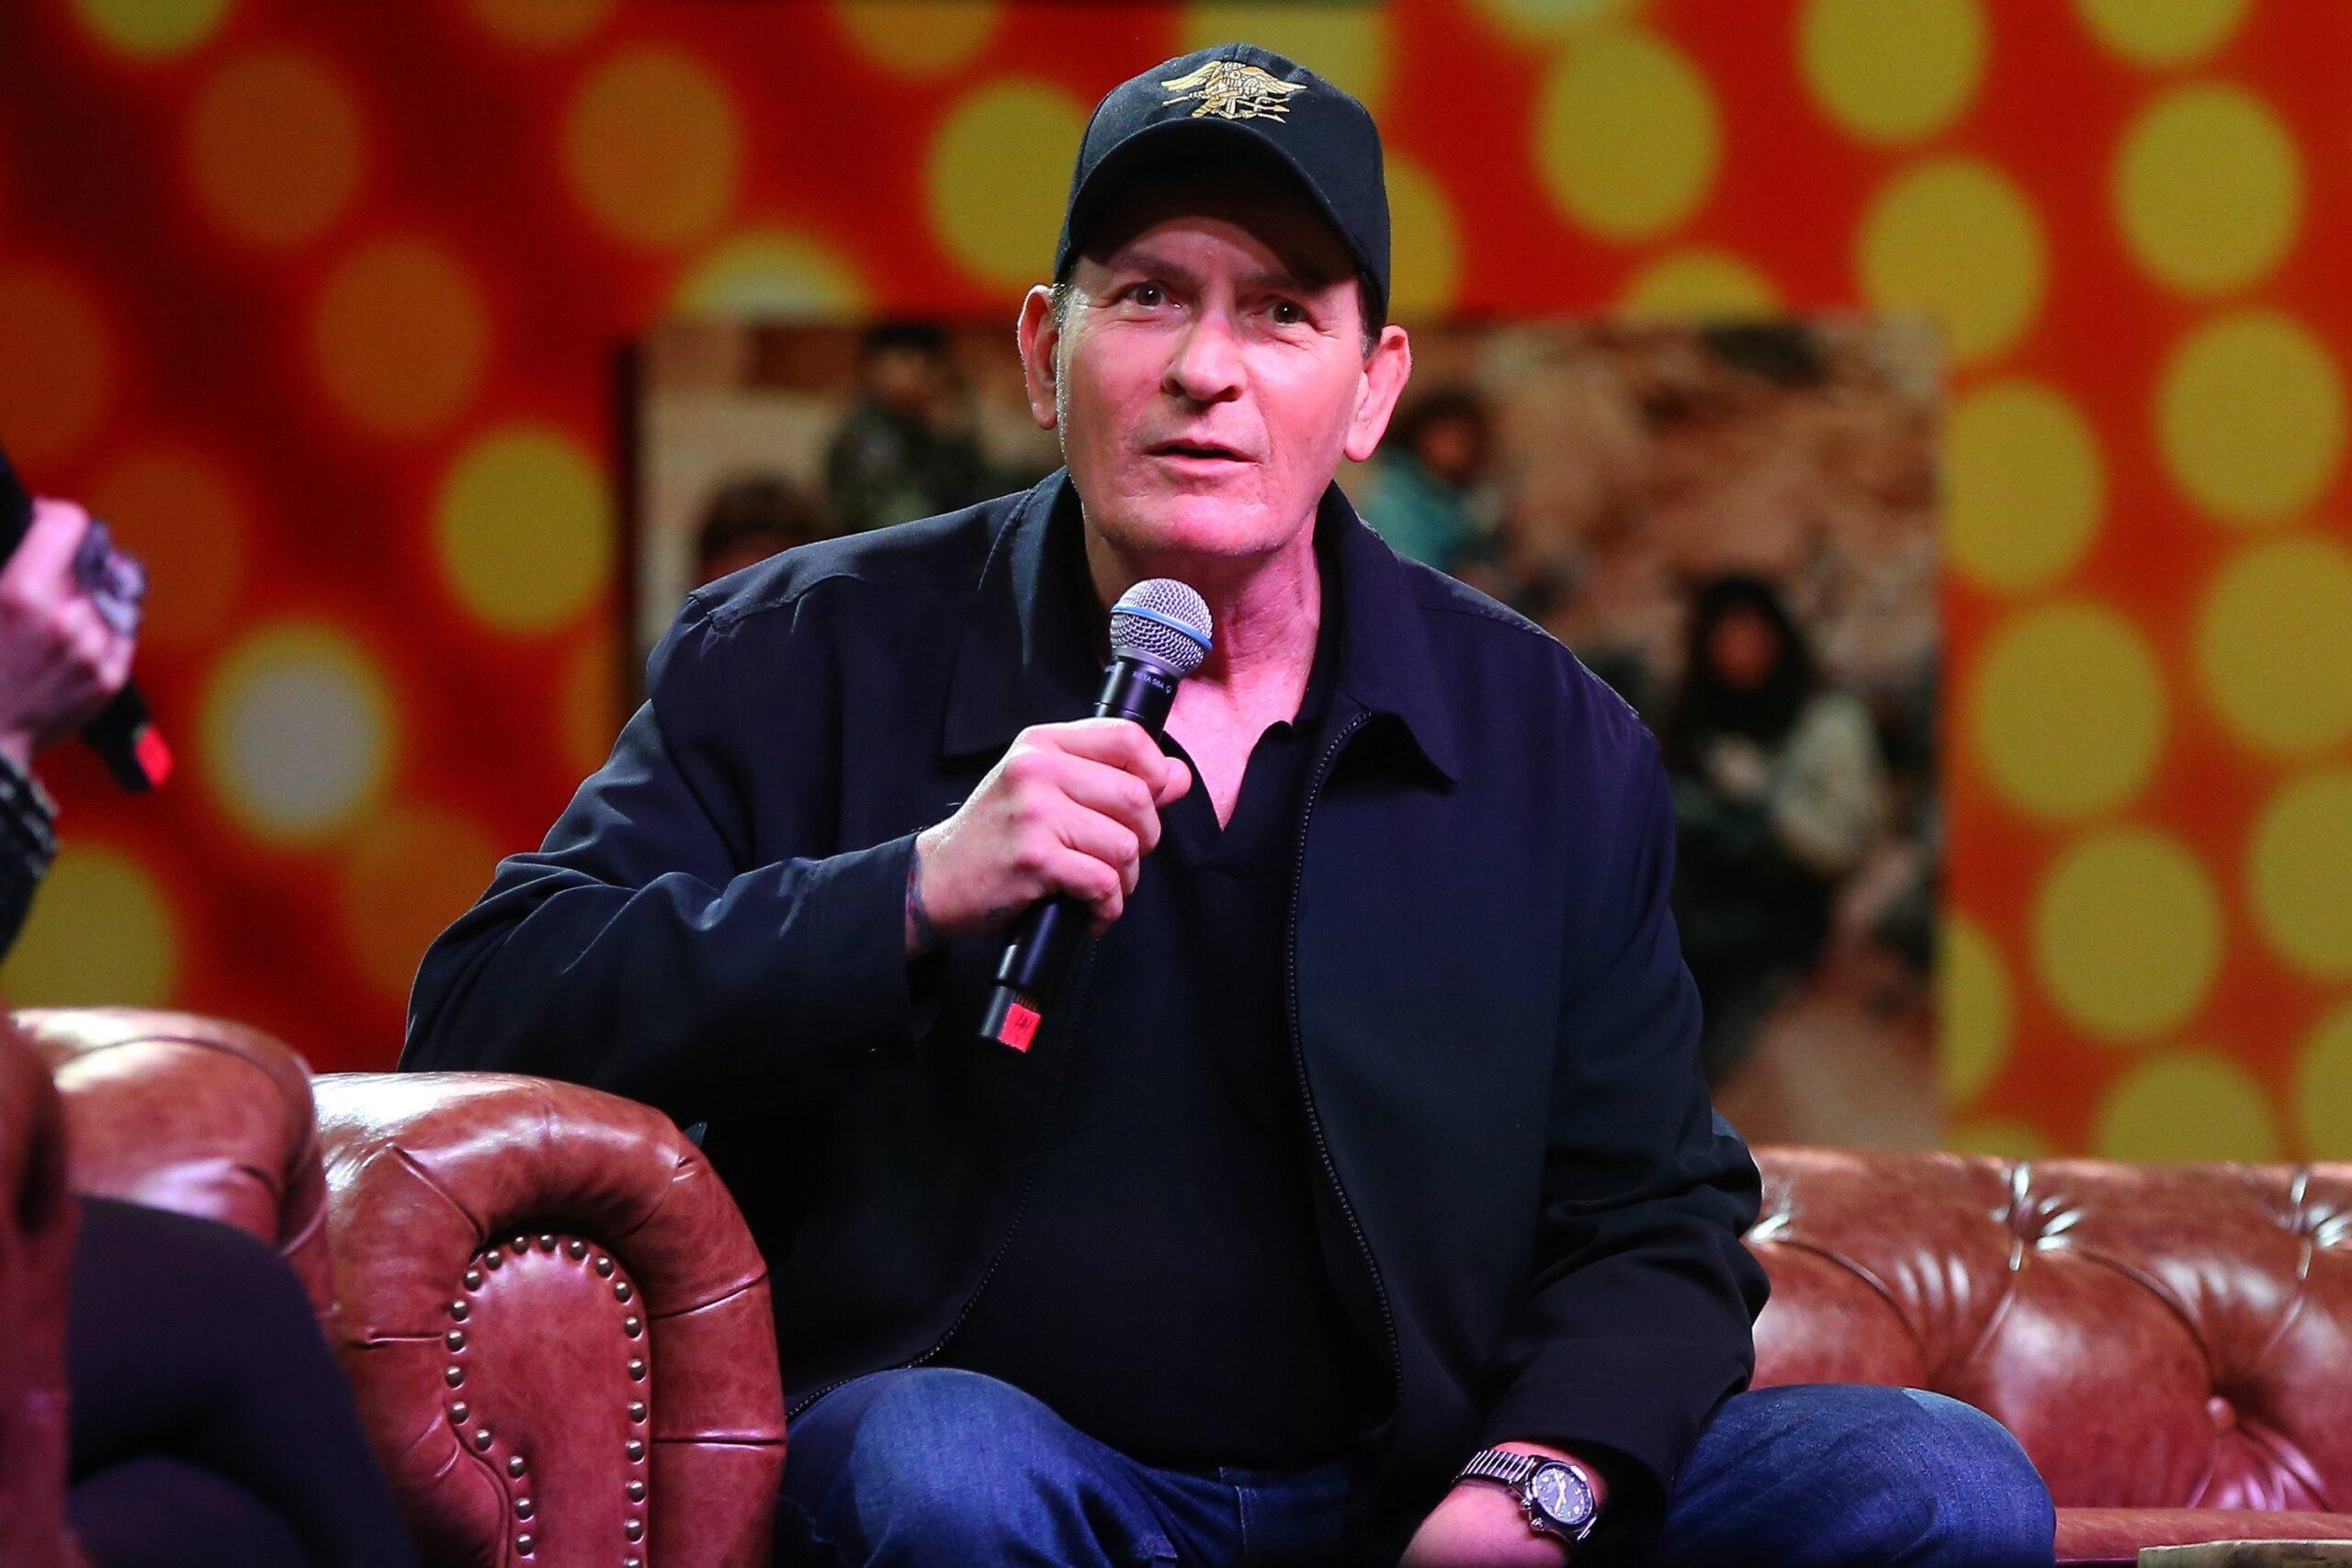 An Intimate Evening with Charlie Sheen At Seminole Casino Coconut Creek